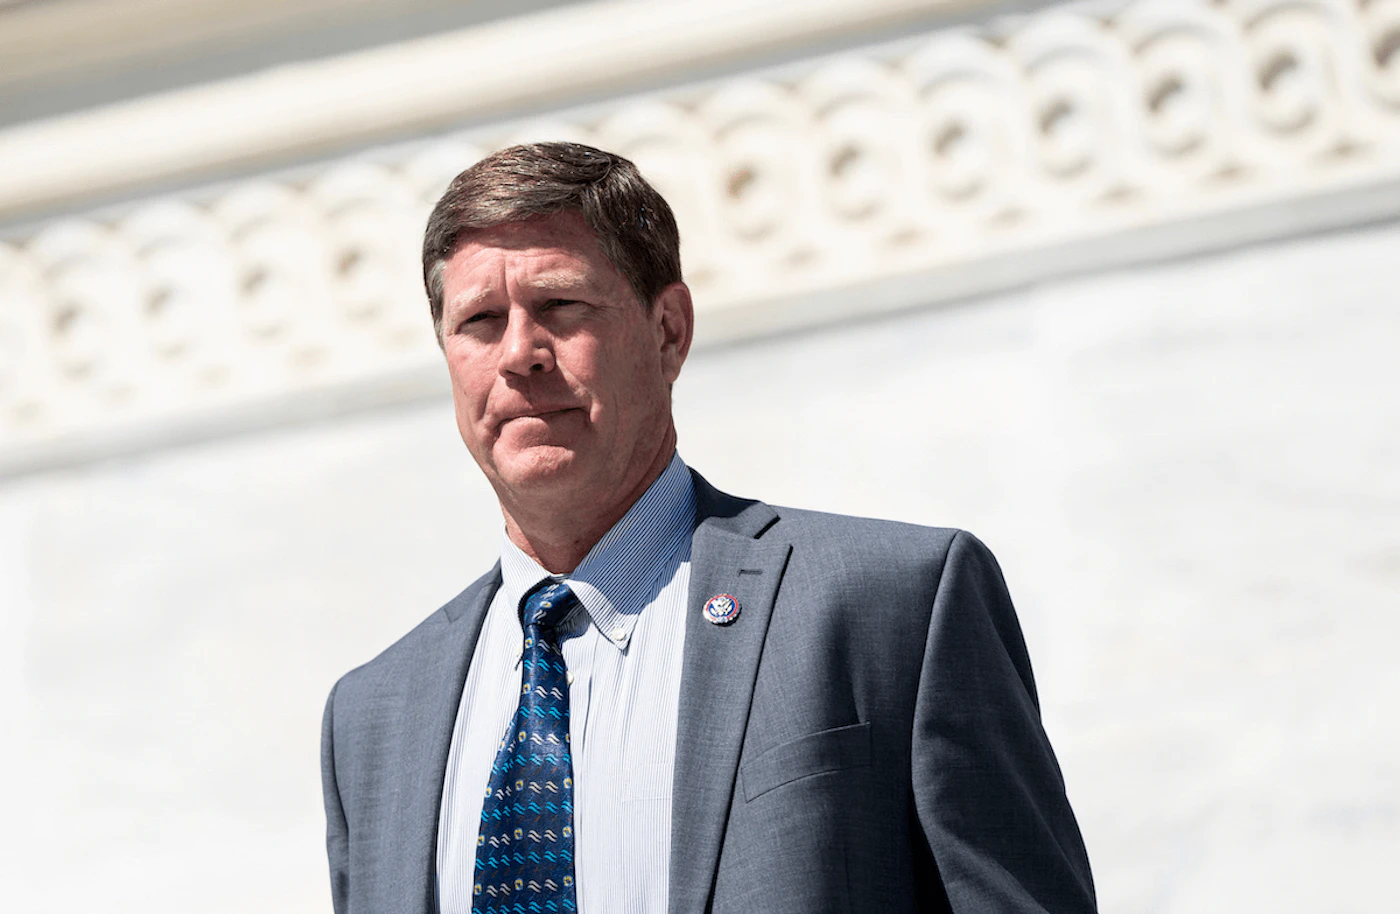 Rep. Ron Kind (D-La Crosse) will not run for re-election in 2022. (Photo by Bill Clark/CQ RollCall Inc. via GettyImages)